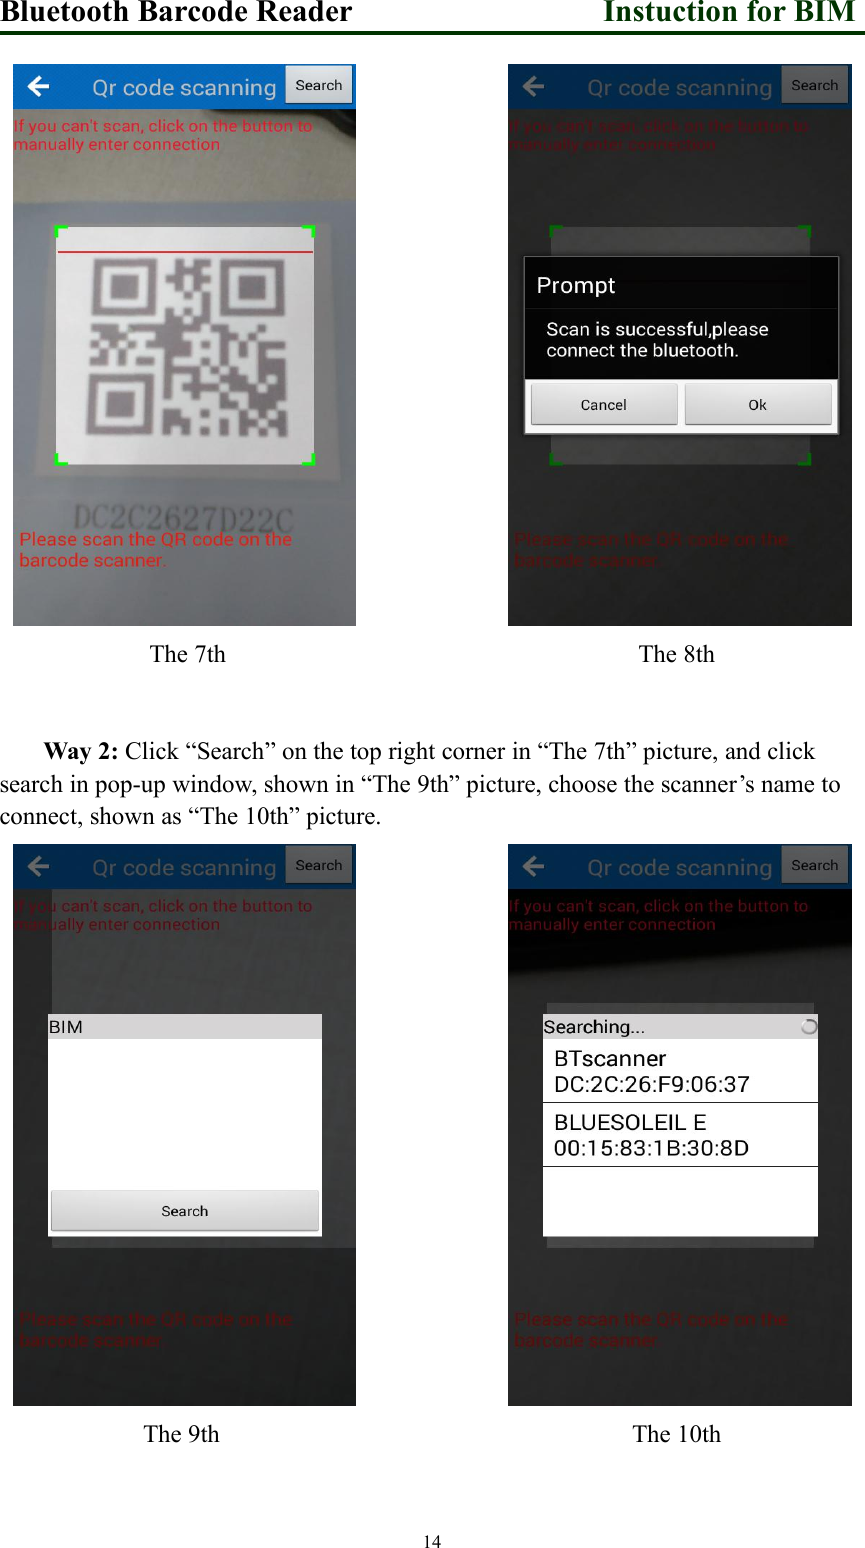 Bluetooth Barcode Reader Instuction for BIM14The 7th The 8thWay 2: Click “Search” on the top right corner in “The 7th” picture, and clicksearch in pop-up window, shown in “The 9th” picture, choose the scanner’s name toconnect, shown as “The 10th” picture.The 9th The 10th